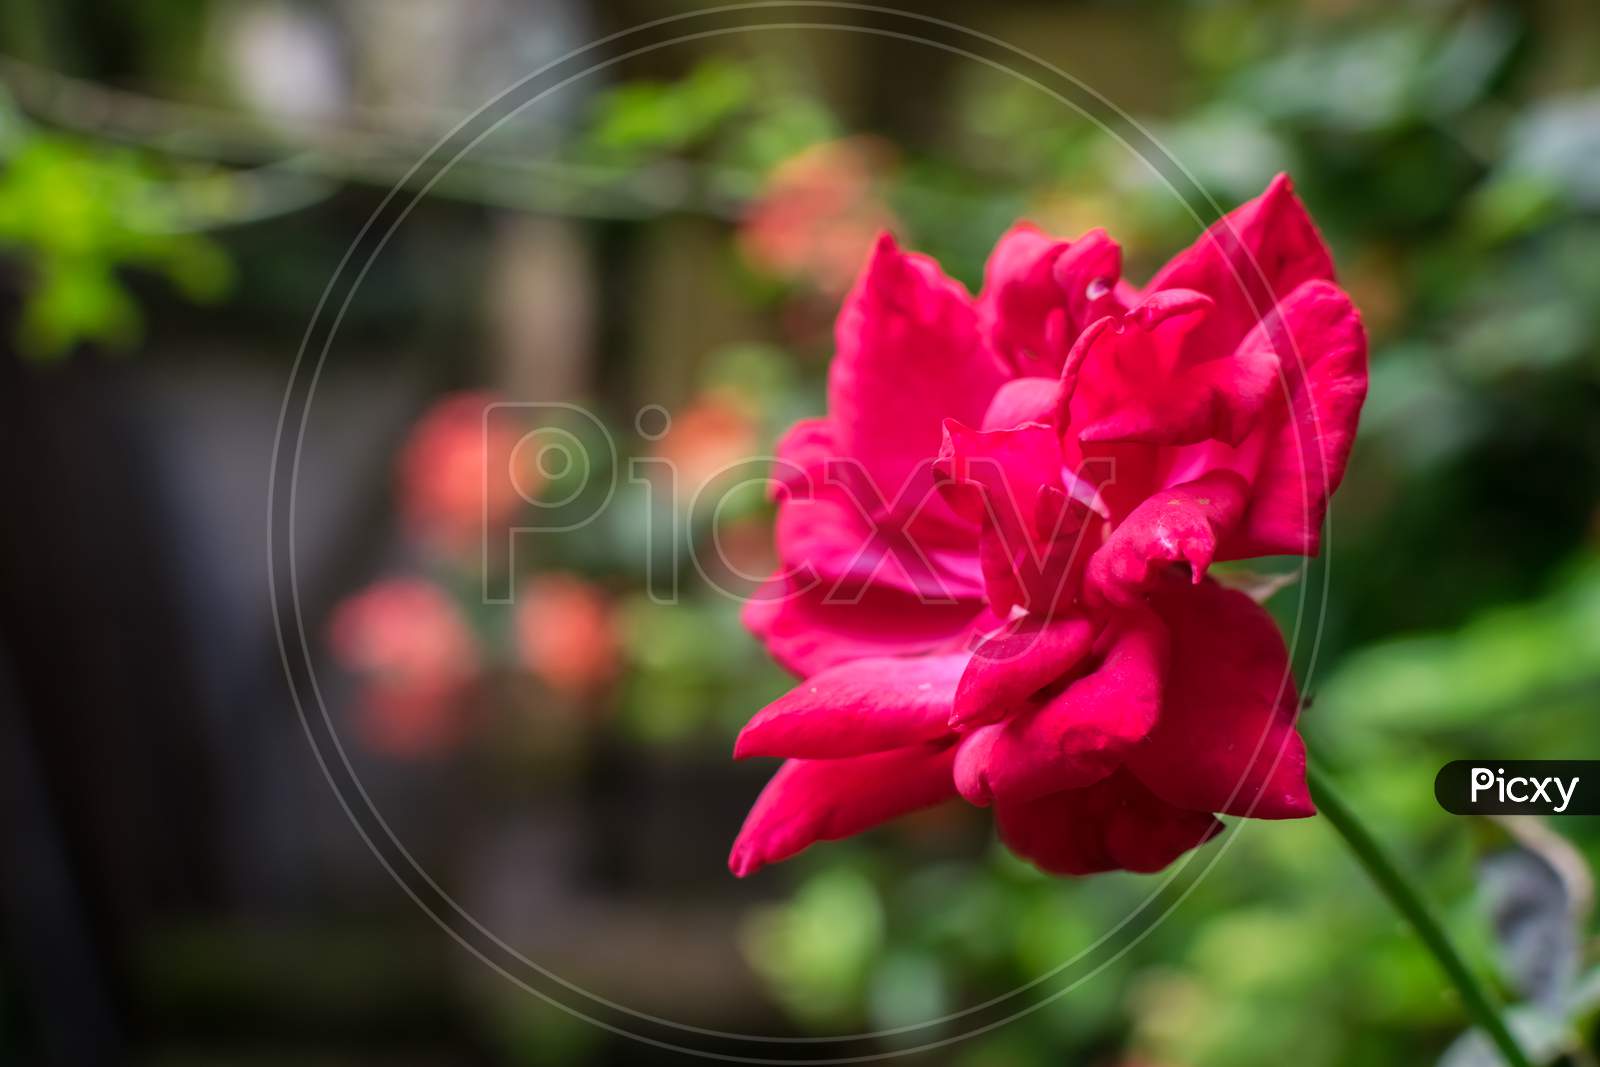 An Isolated Red Rose In Focus With A Blurred Background